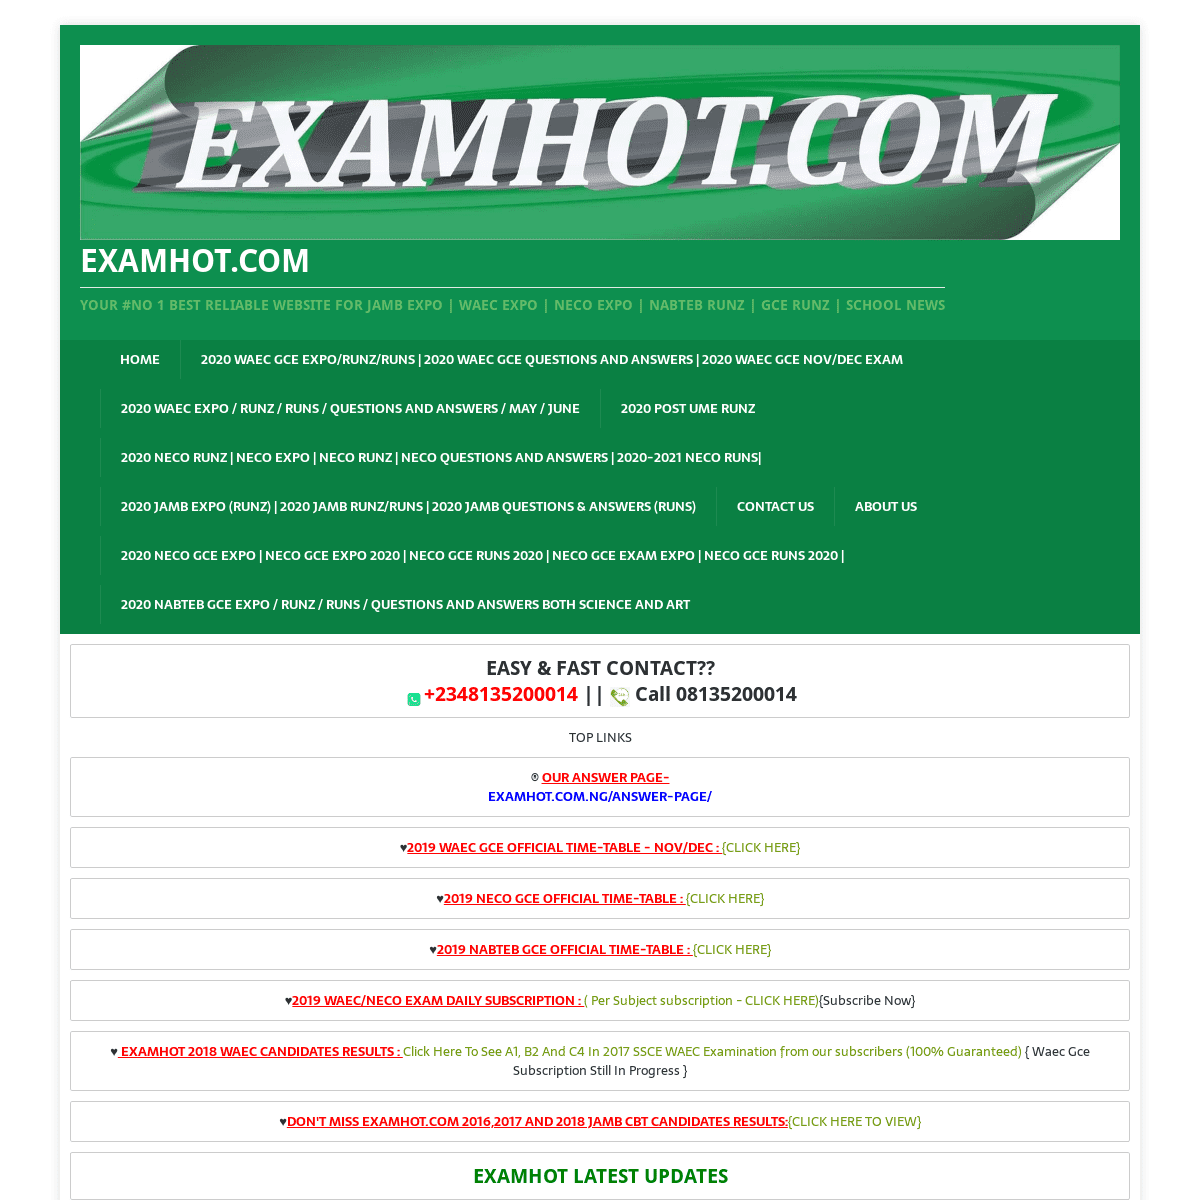 A complete backup of examhot.com